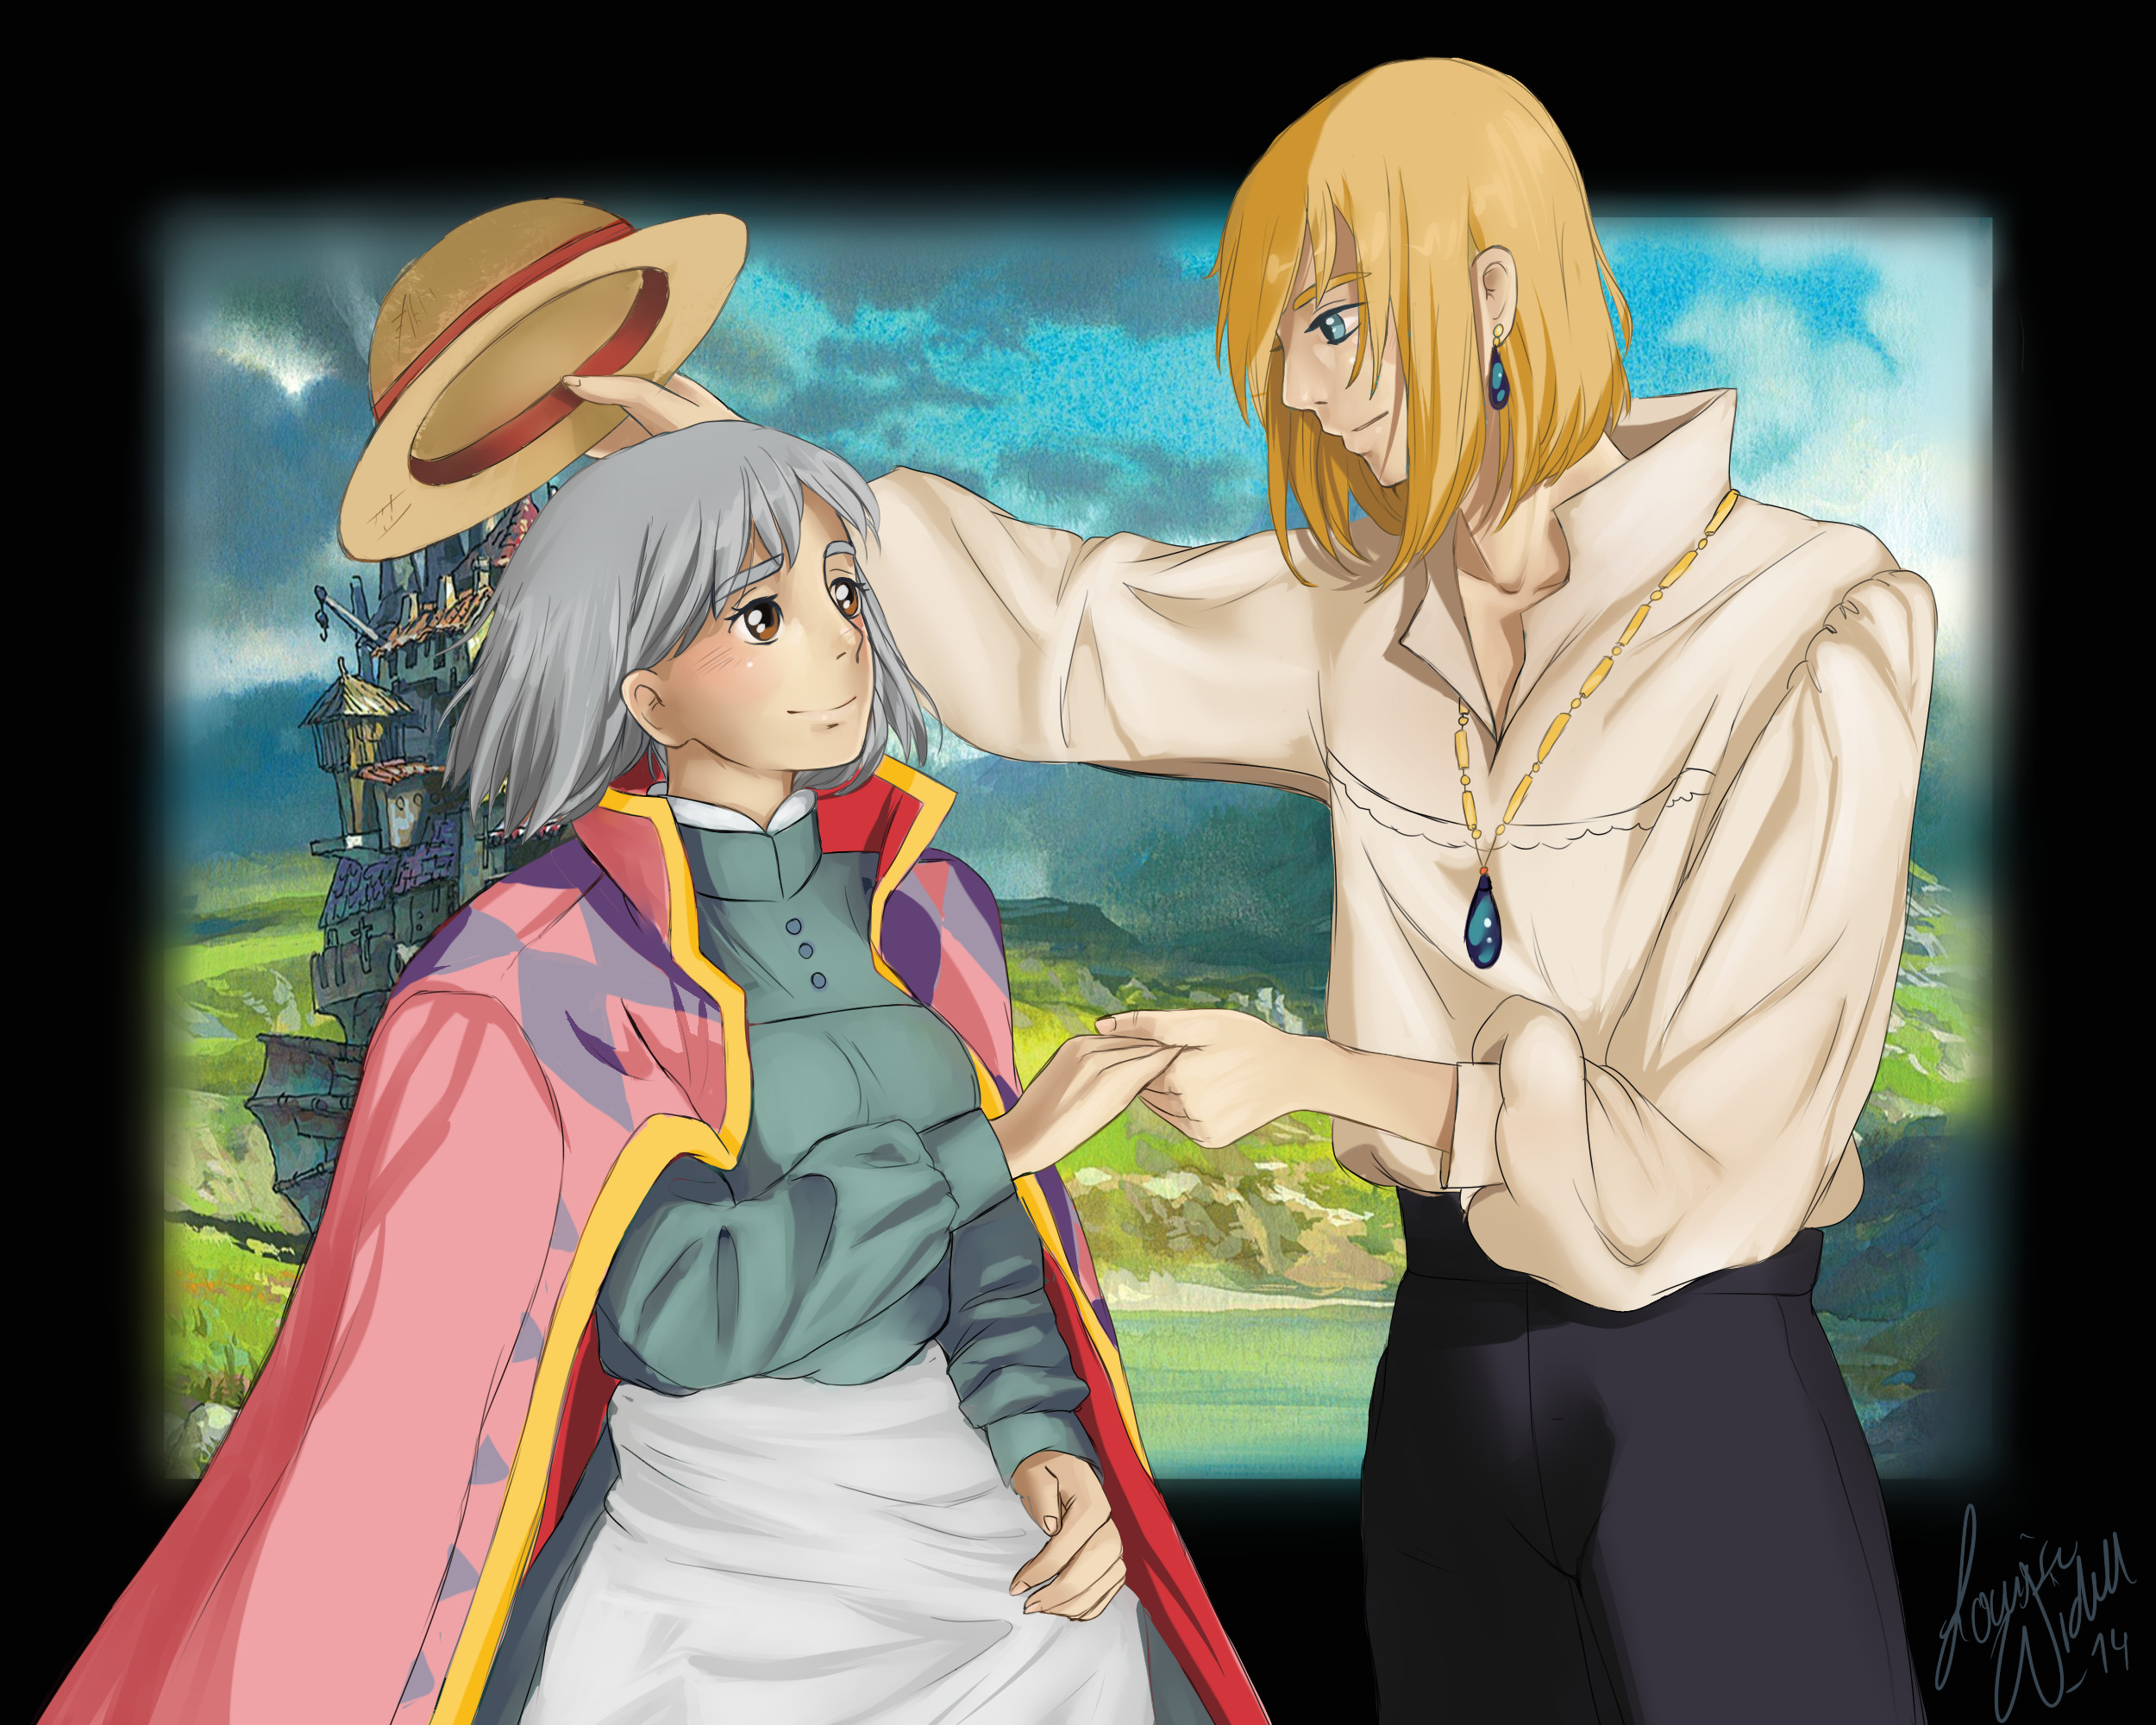 2500x2000 ... Fanart: Sophie and Howl - Howl's moving castle by TheBananafly